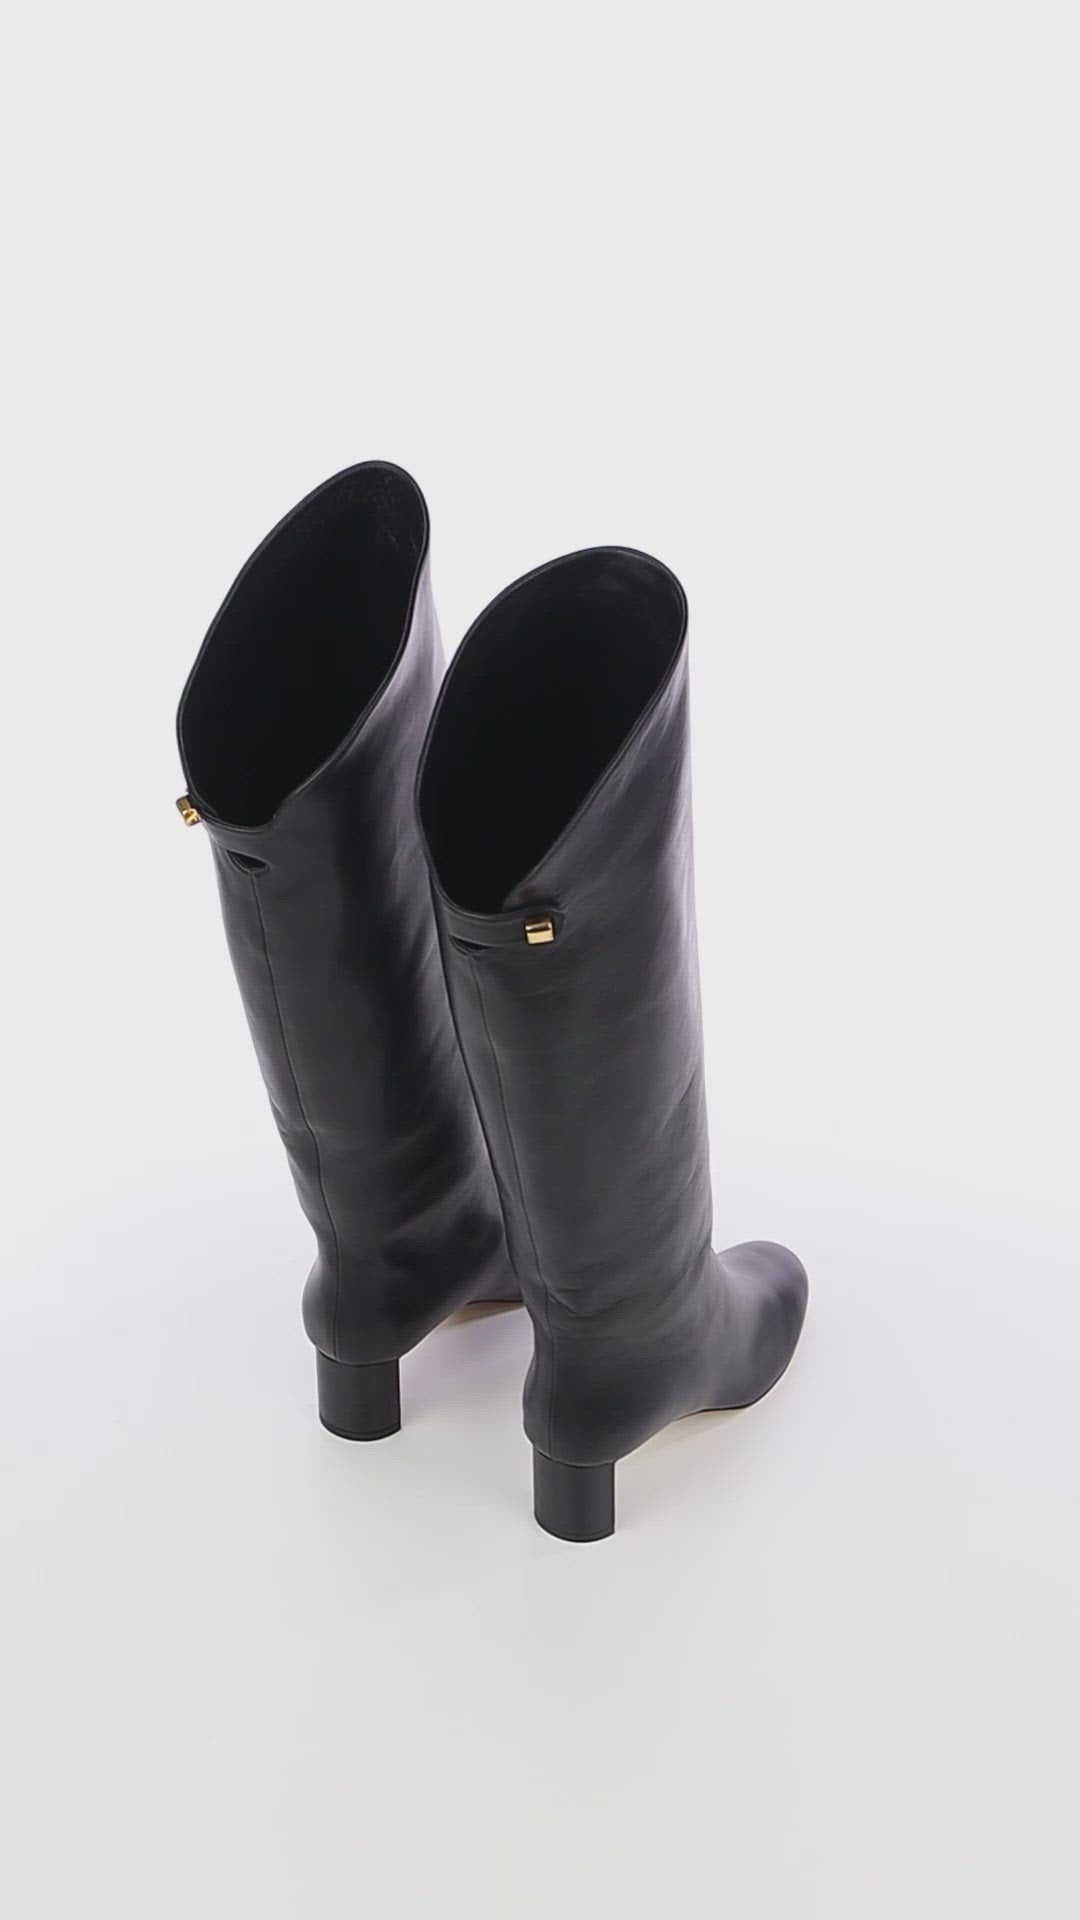 designer black leather boots with comfortable mid heel made in Italy for women skorpios